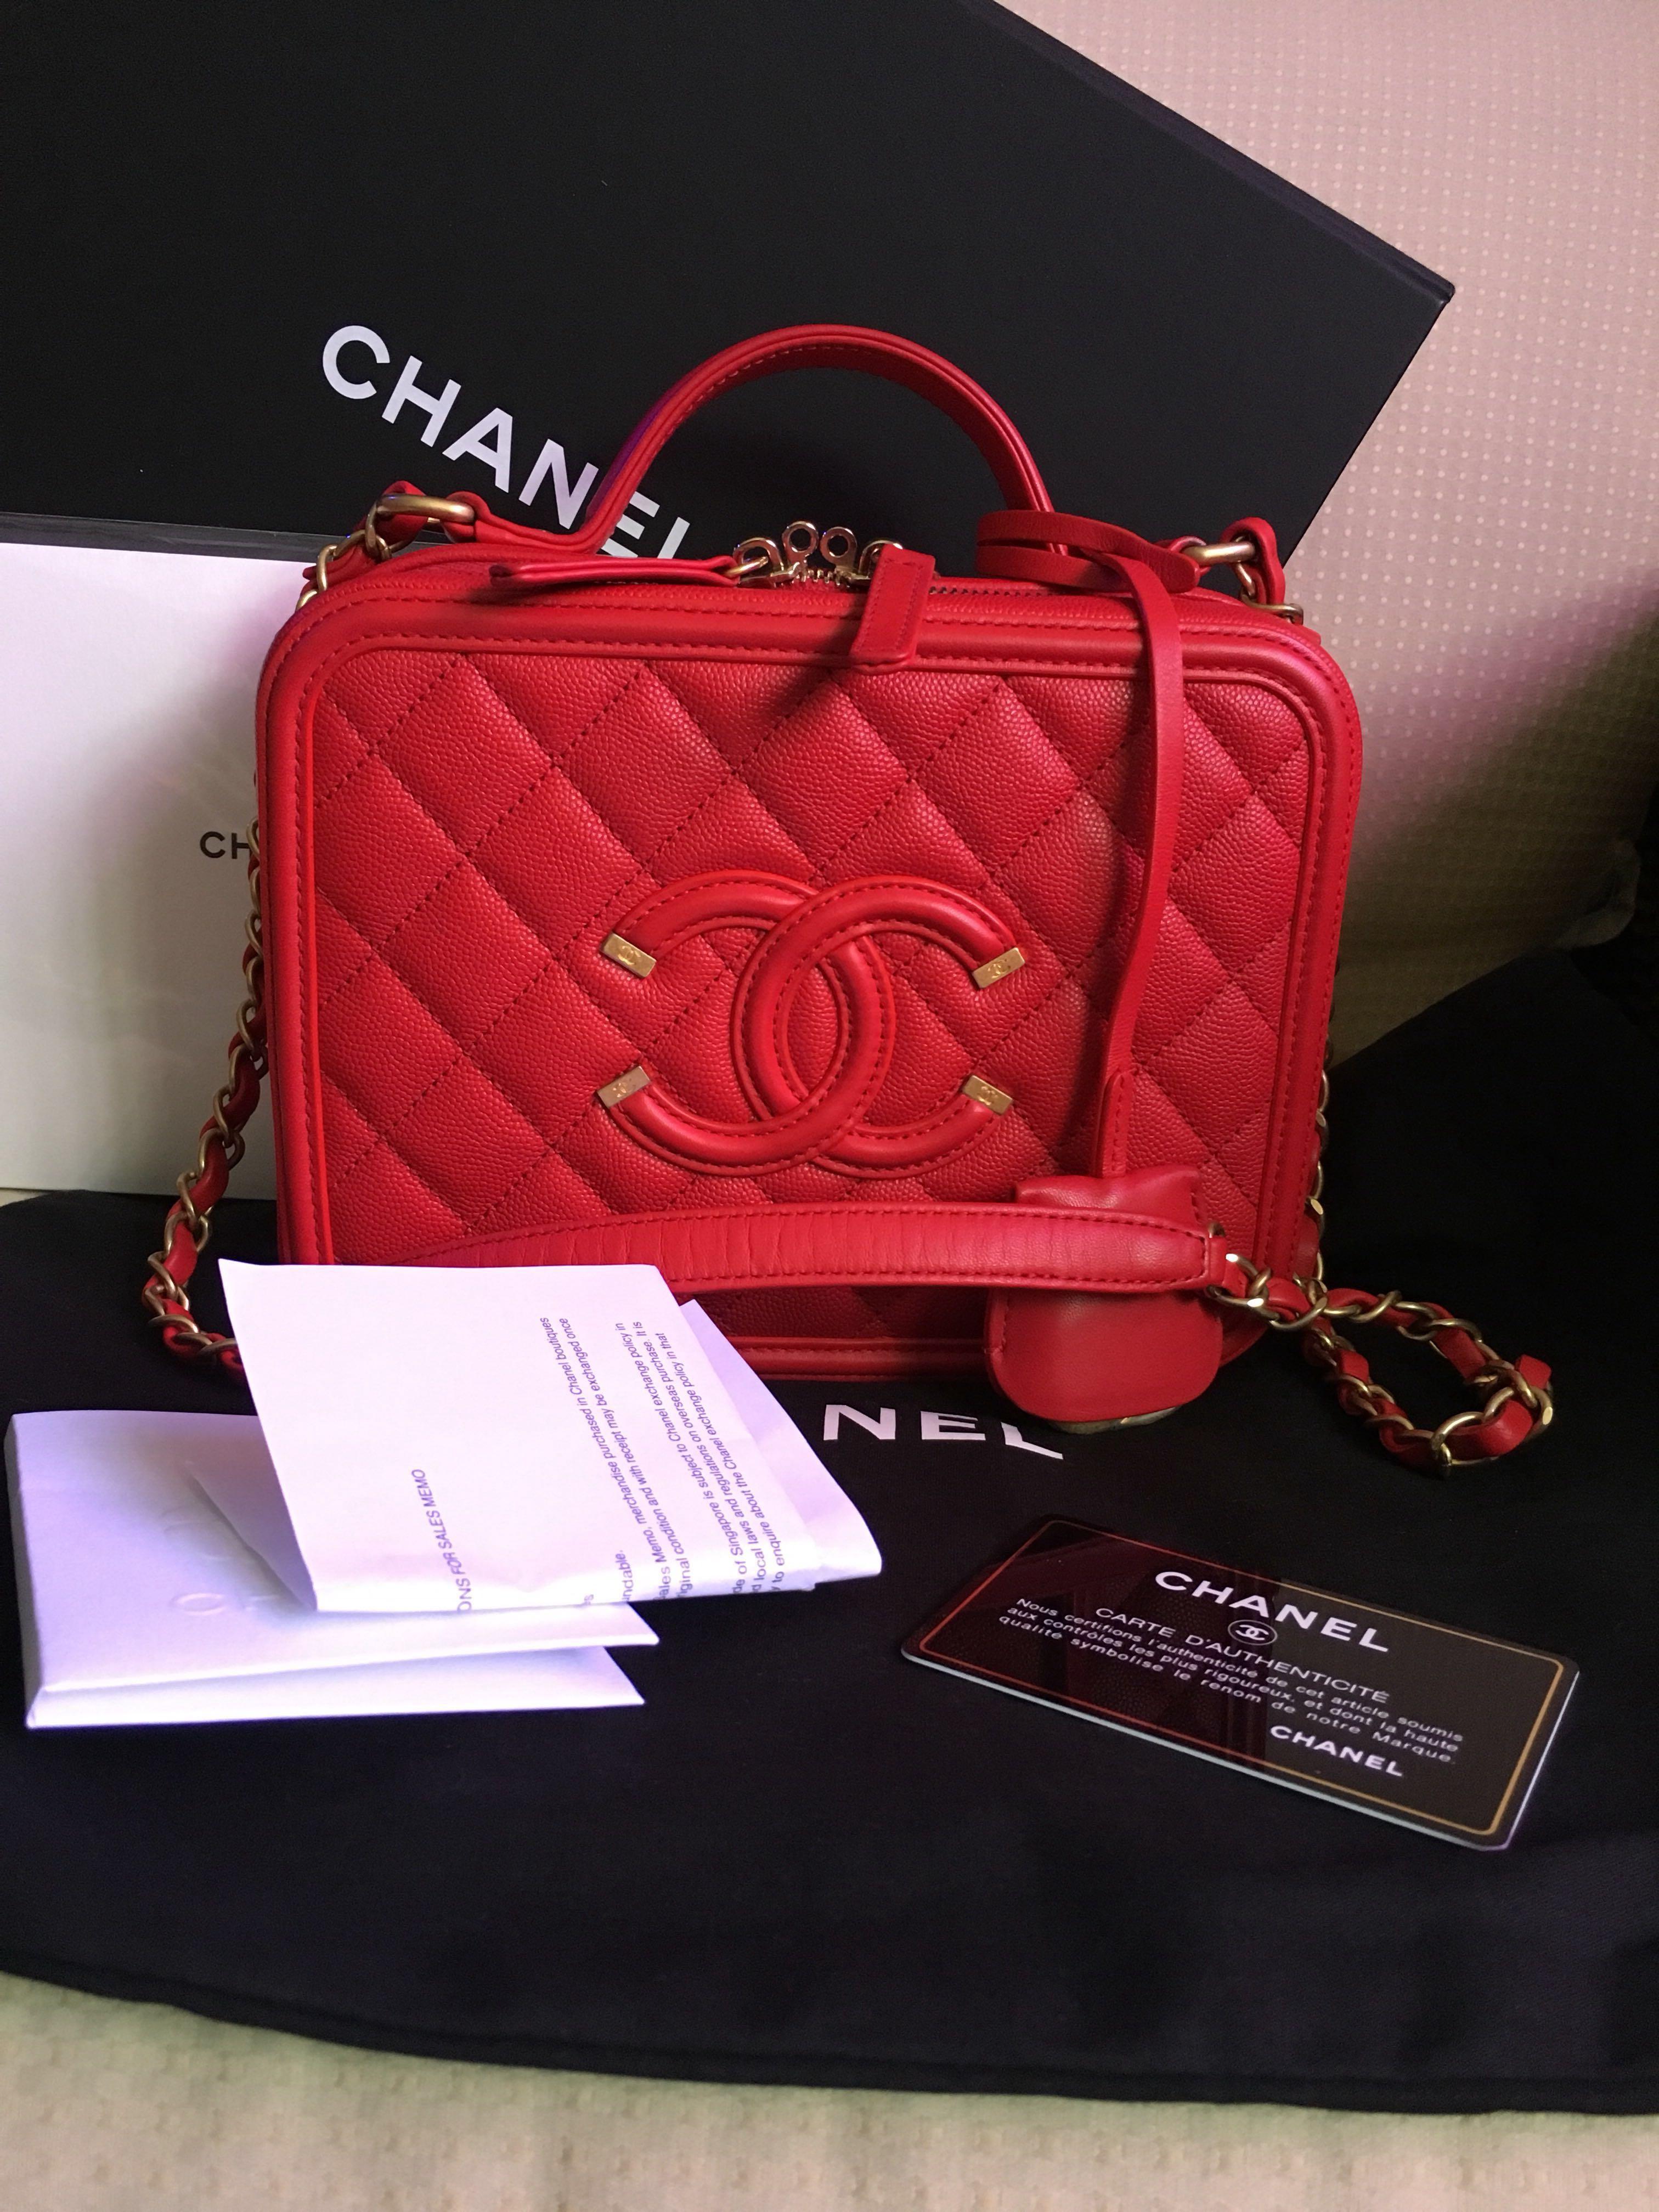 Bag Swap - What fits in the Nano Nice & Chanel Small Vanity Box